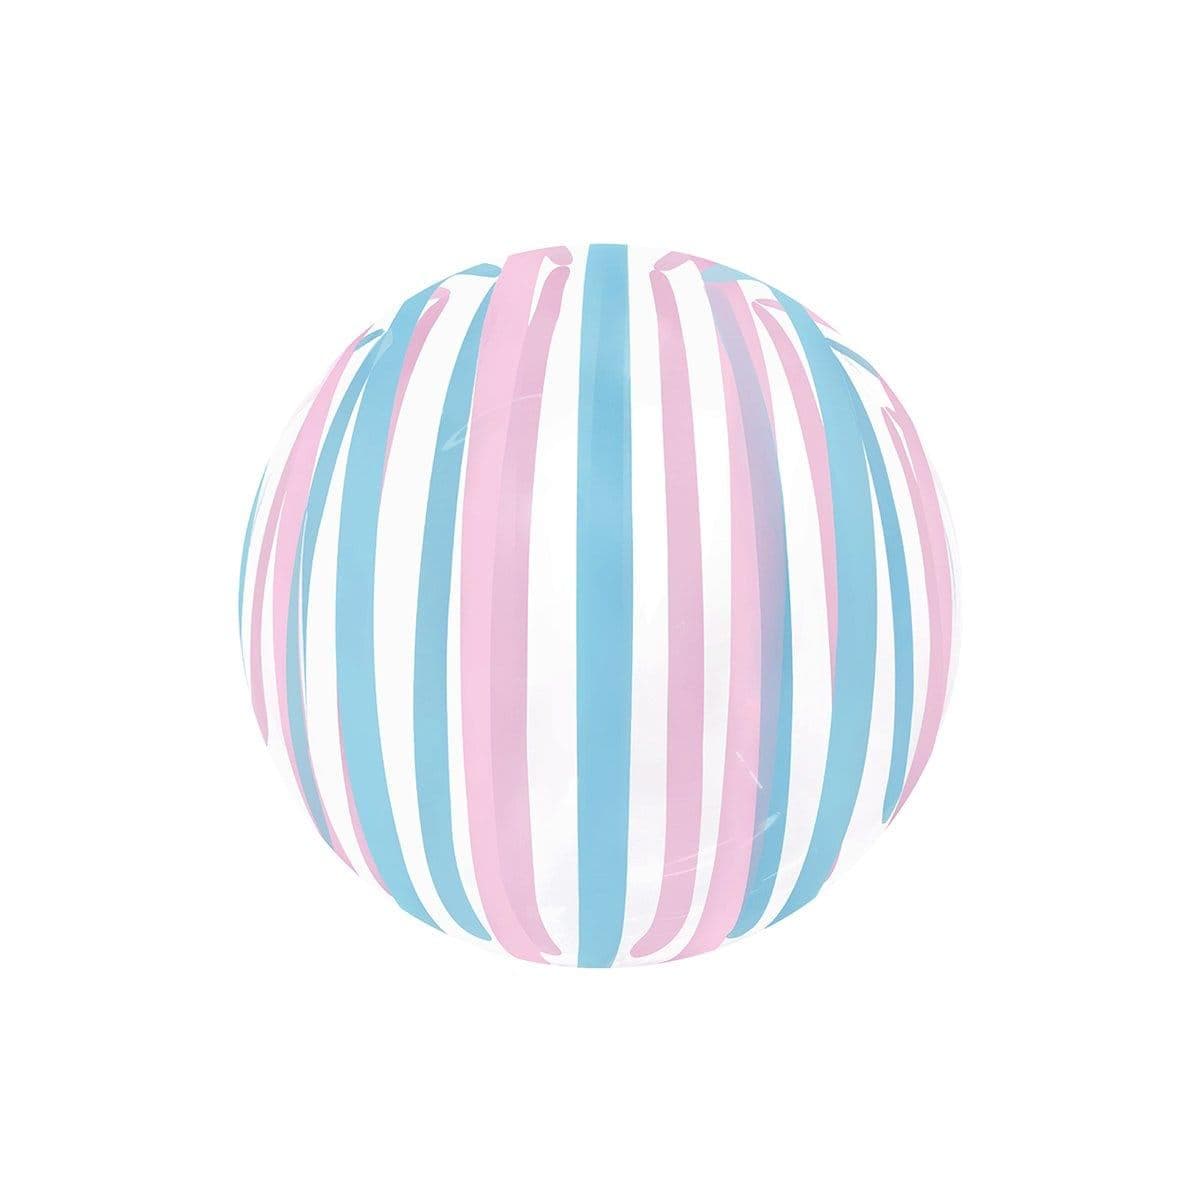 Buy Balloons Stripe Bubble Balloon, Pink & Blue, 18 Inches sold at Party Expert